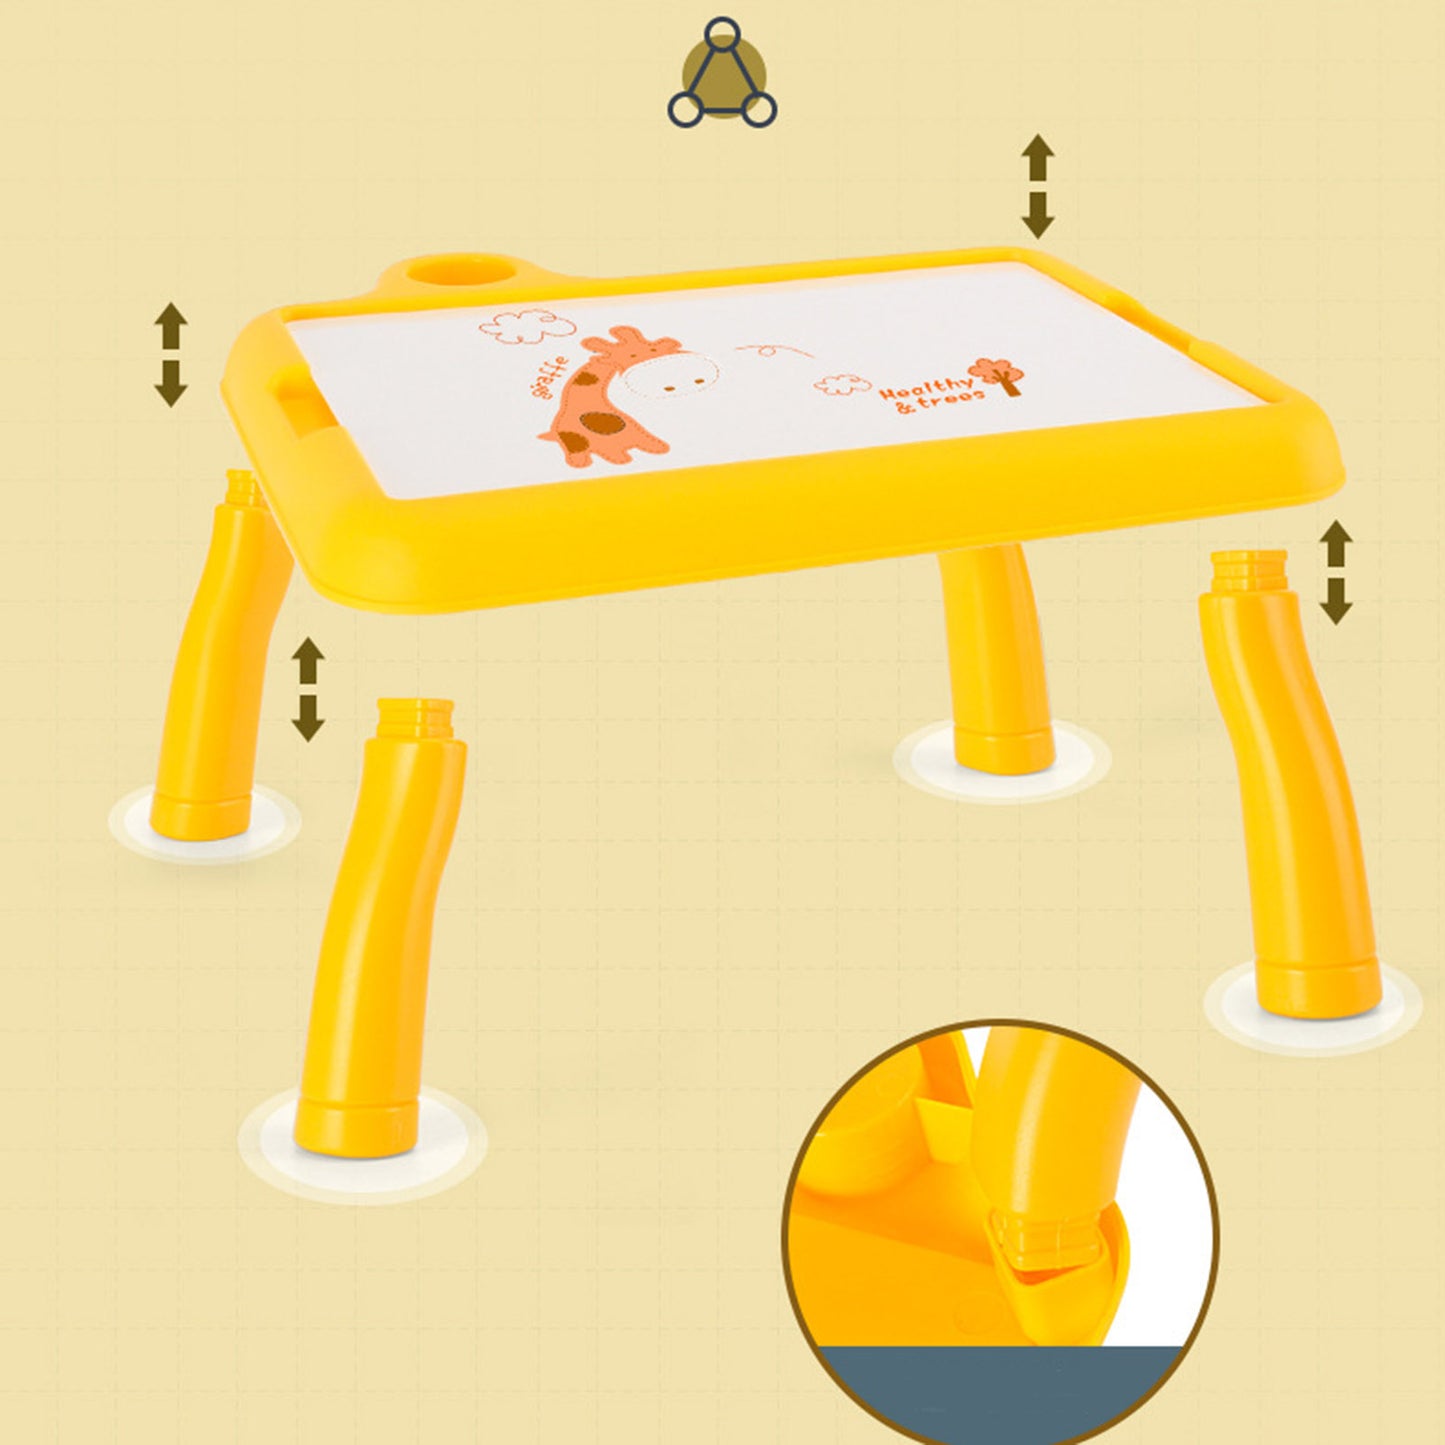 Children LED Projector Art Drawing Table Toys Painting Board Desk_Marryumcollections.com